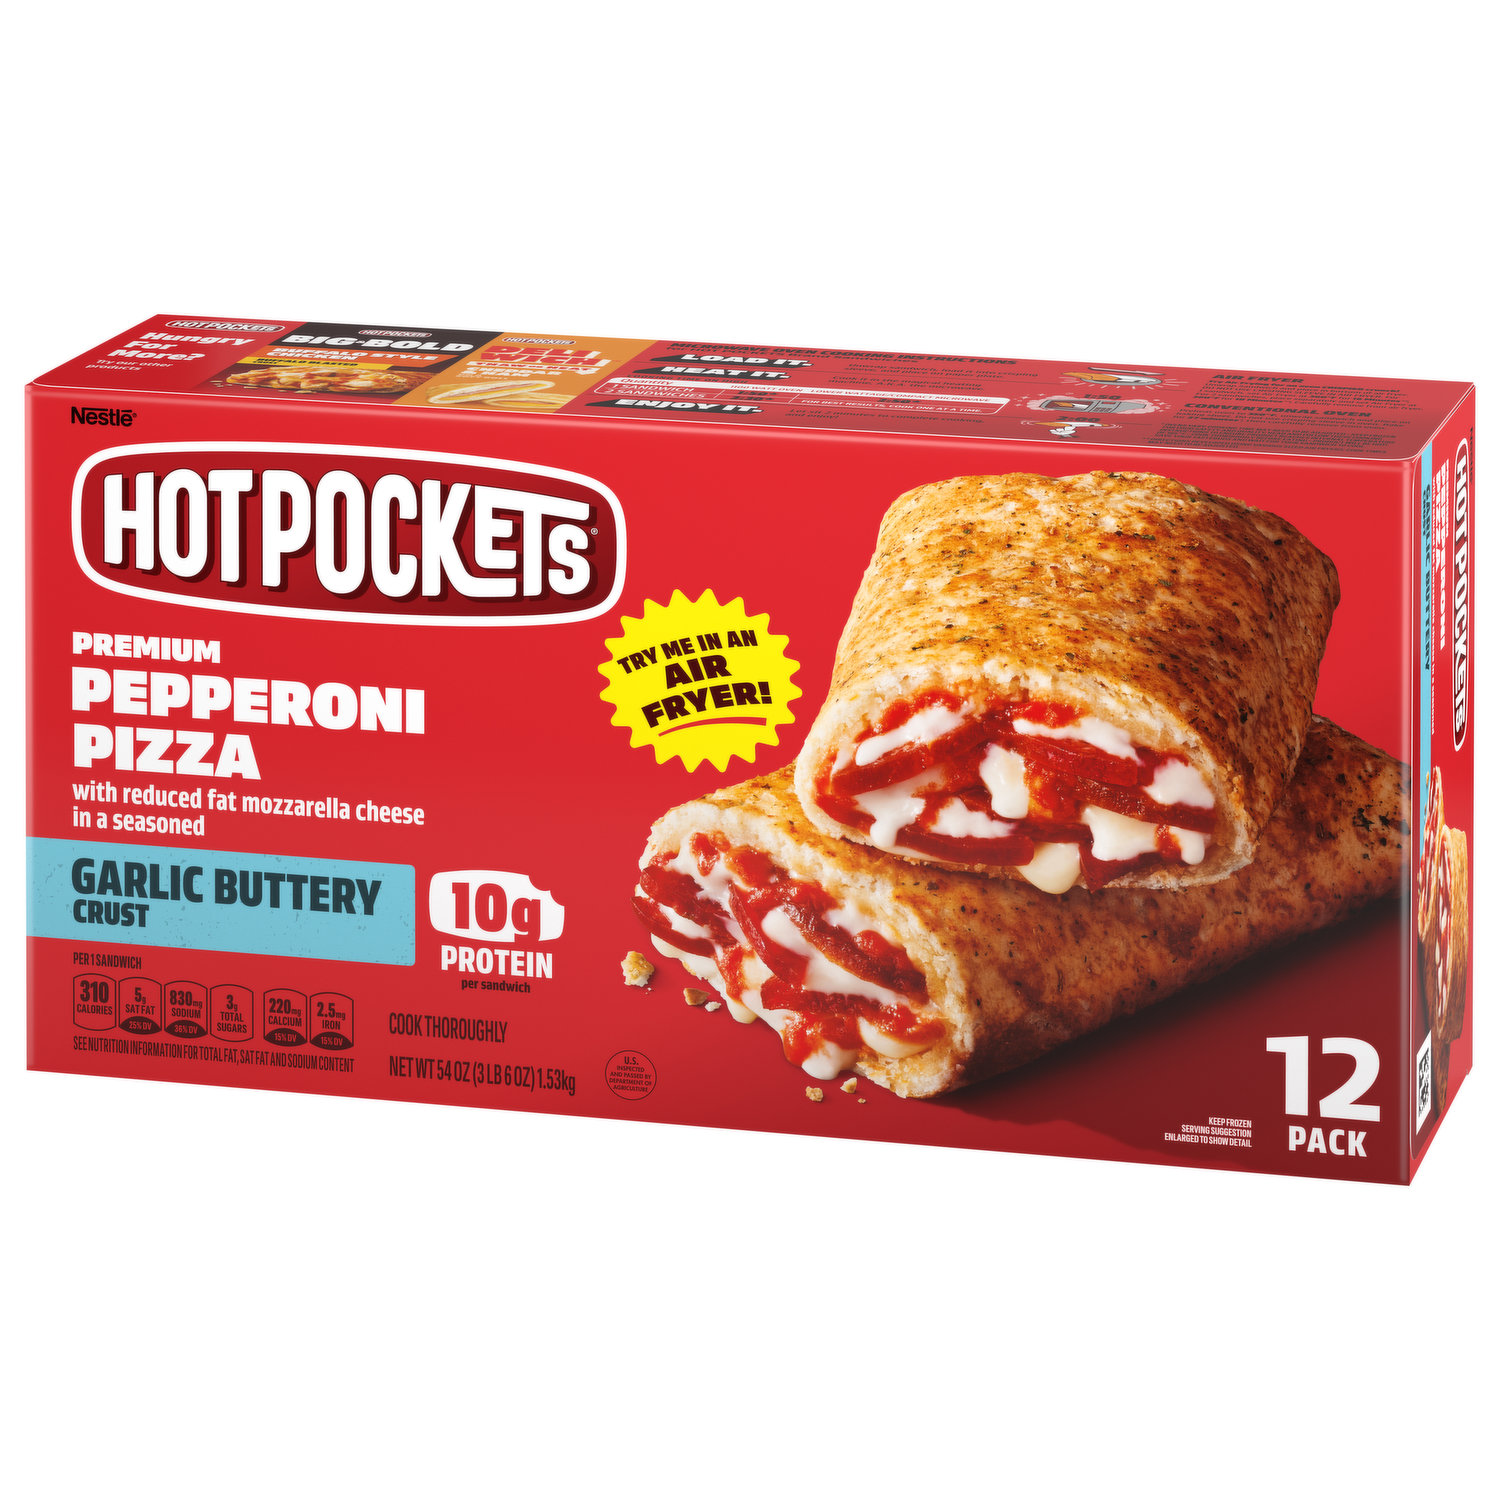 Pepperoni Hot Pockets with the Pampered Chef Hand Pie & Pocket Maker! 